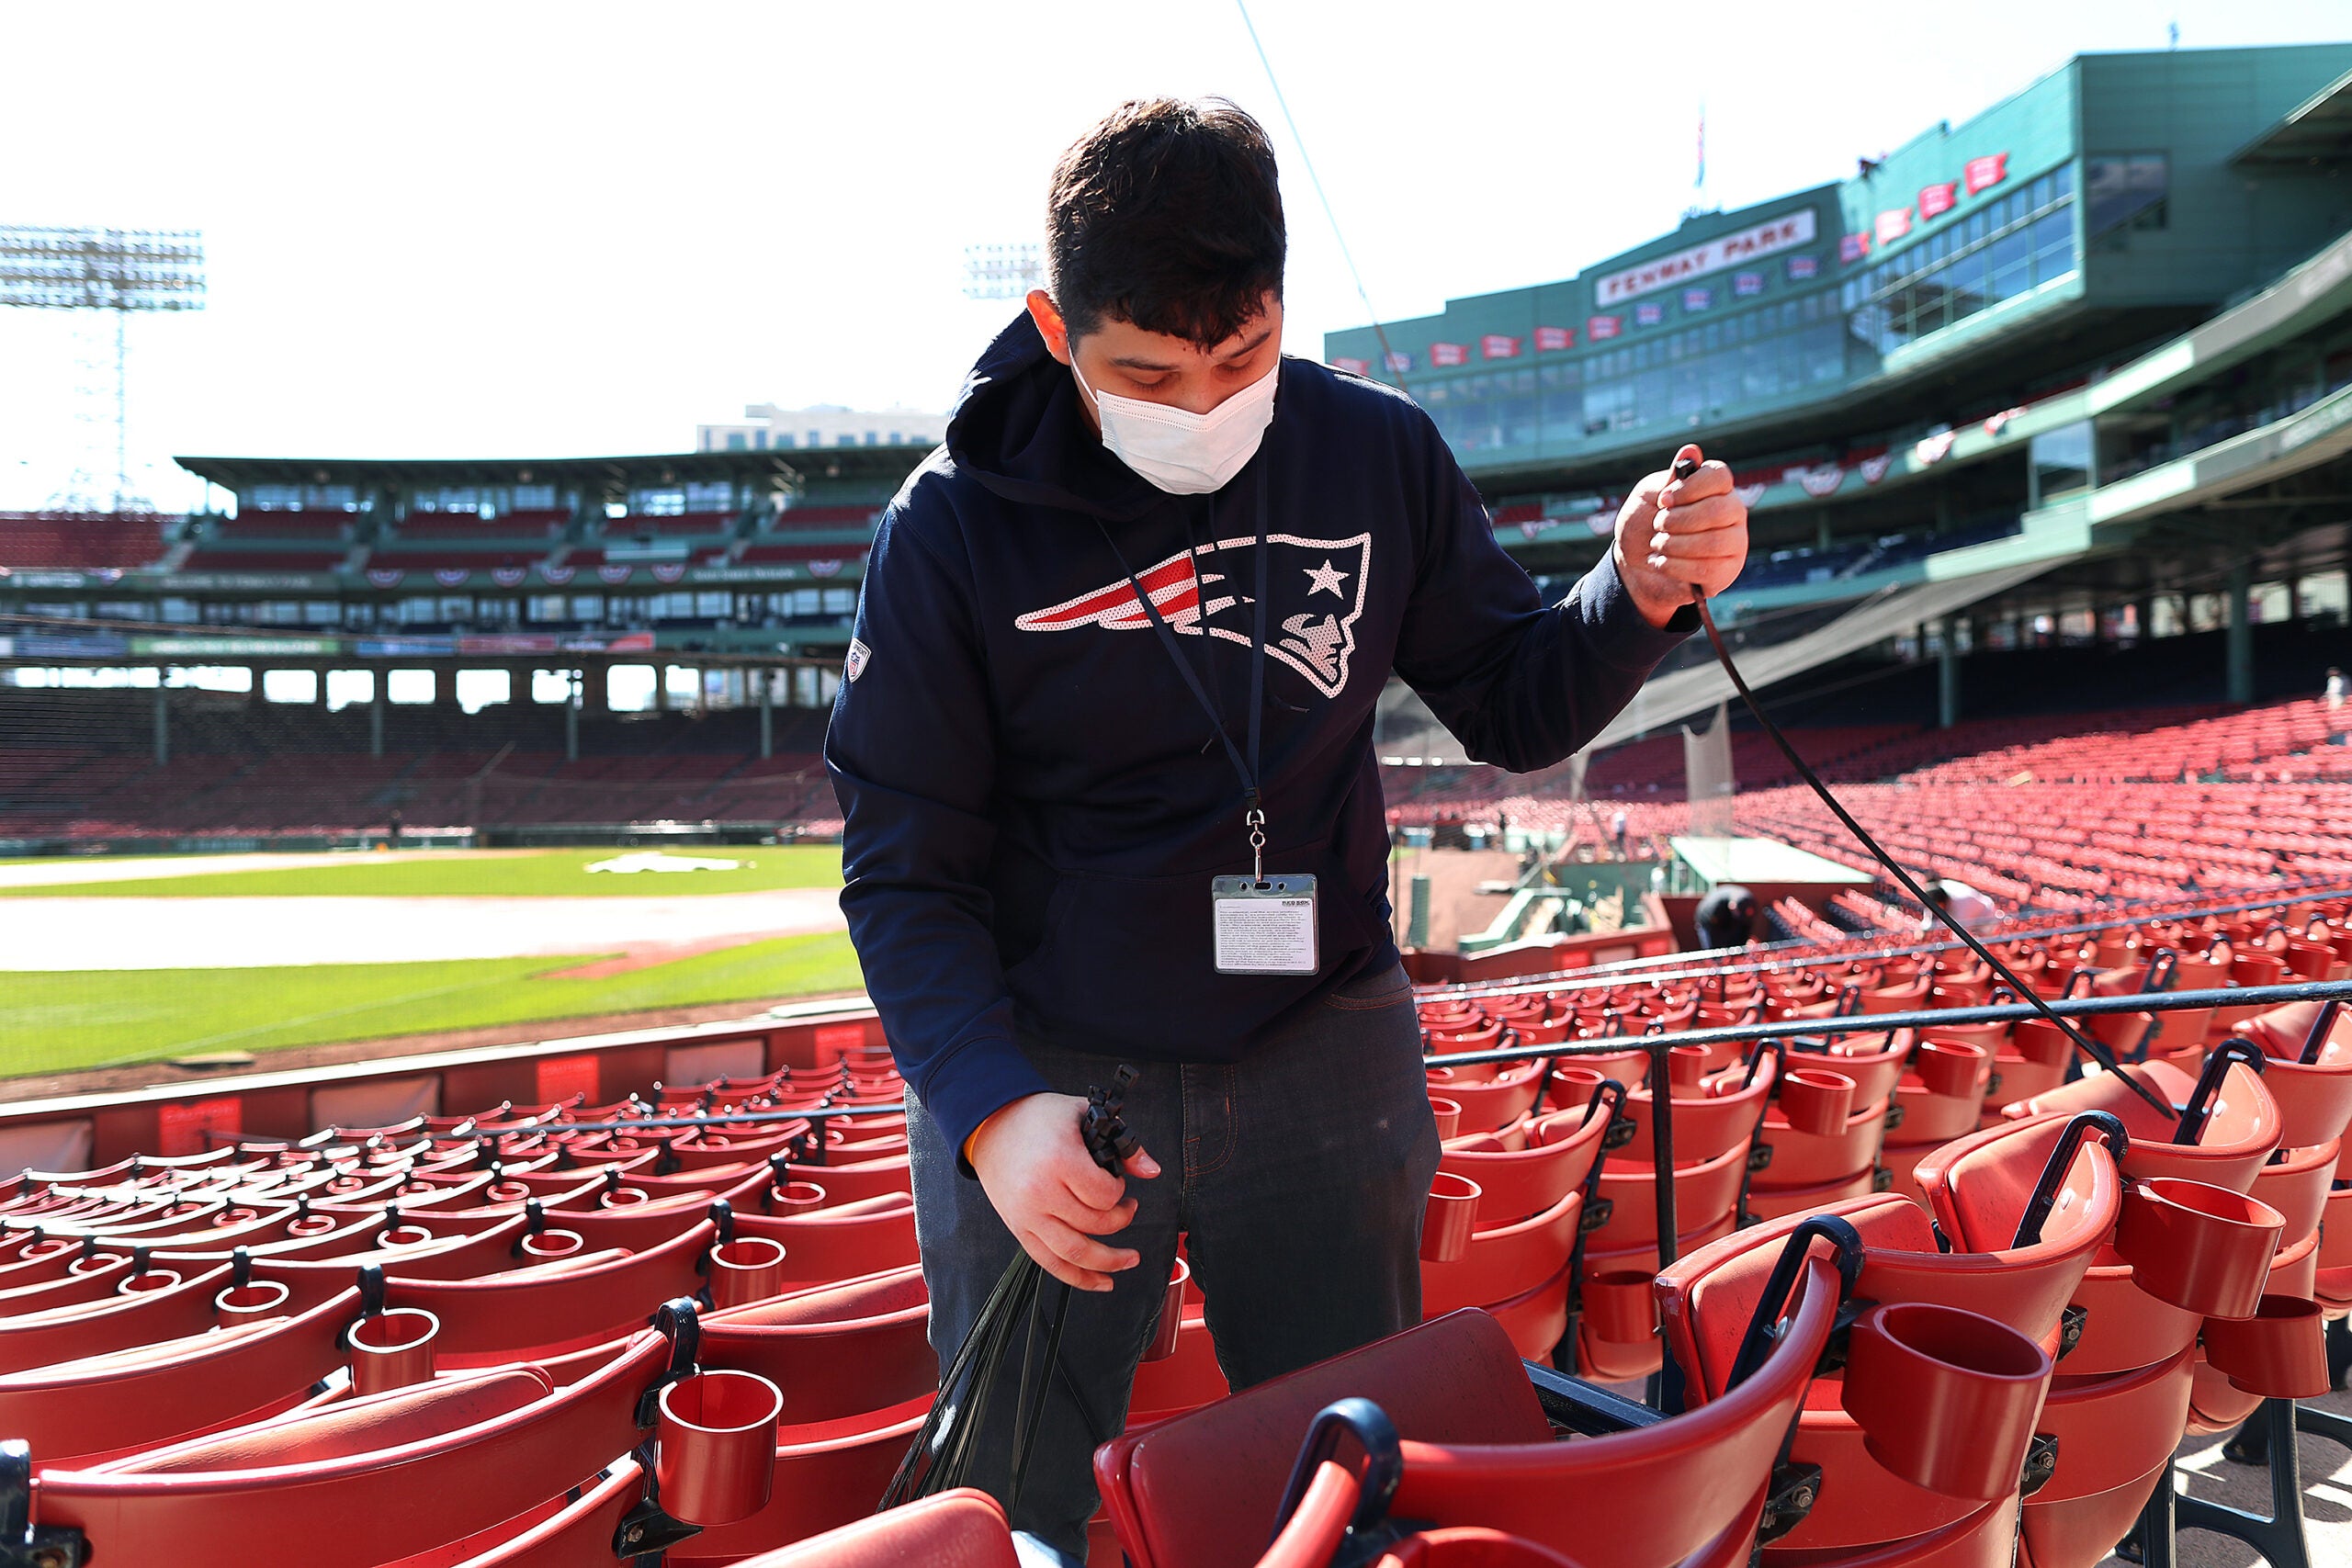 Red Sox fans fill Fenway Park for Opening Day